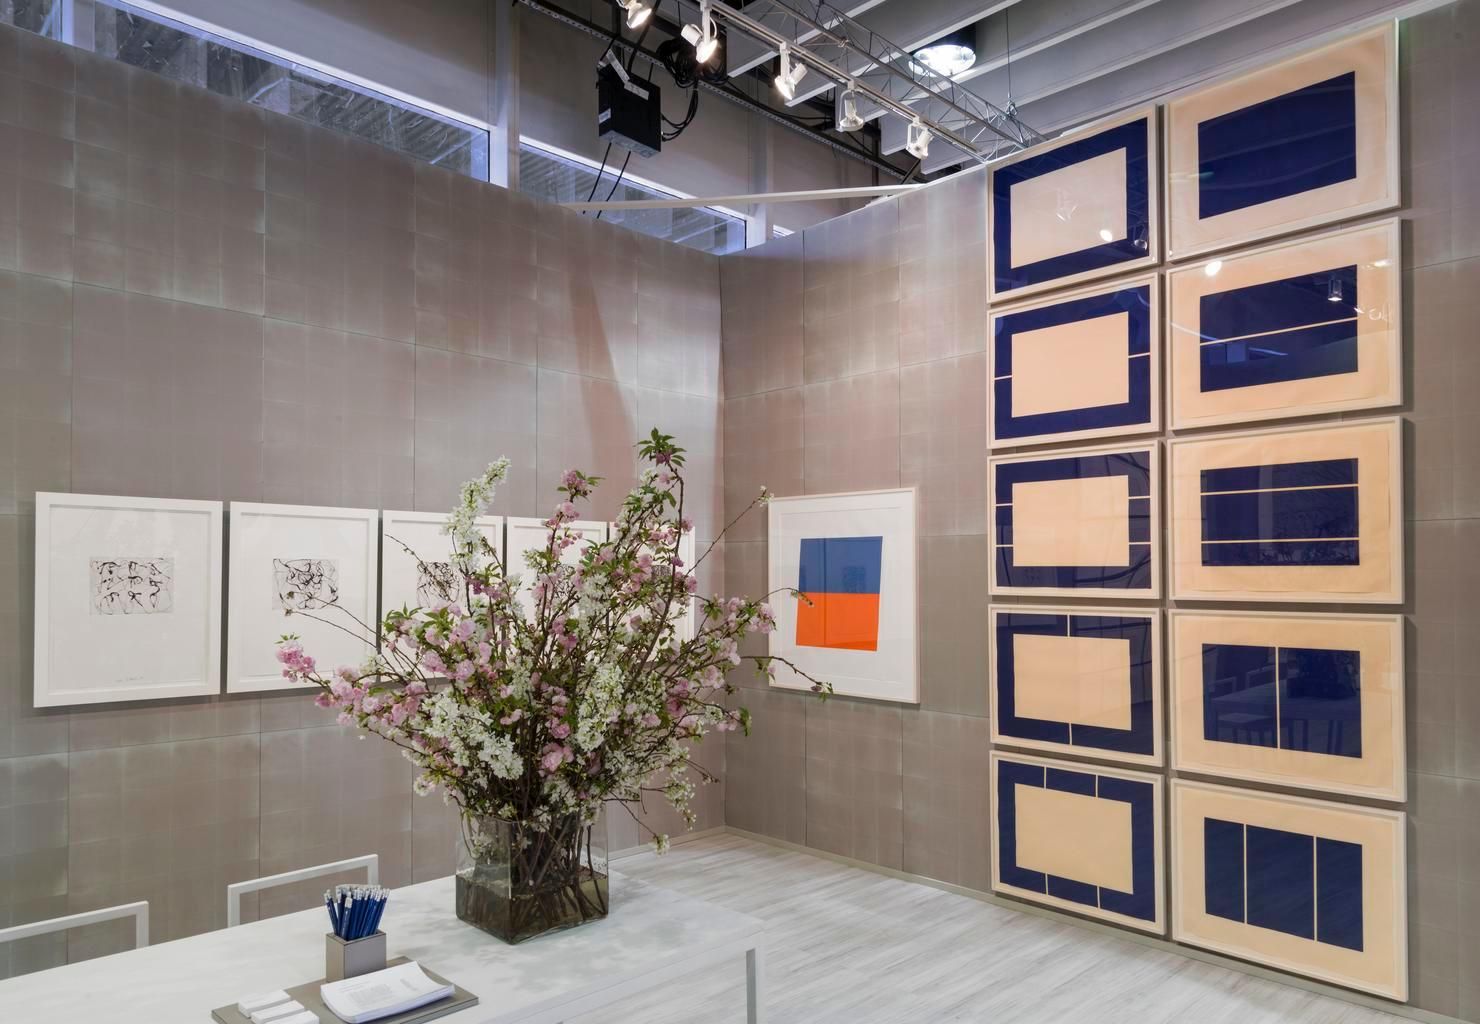 The Armory Show 2016 at Susan Sheehan Gallery